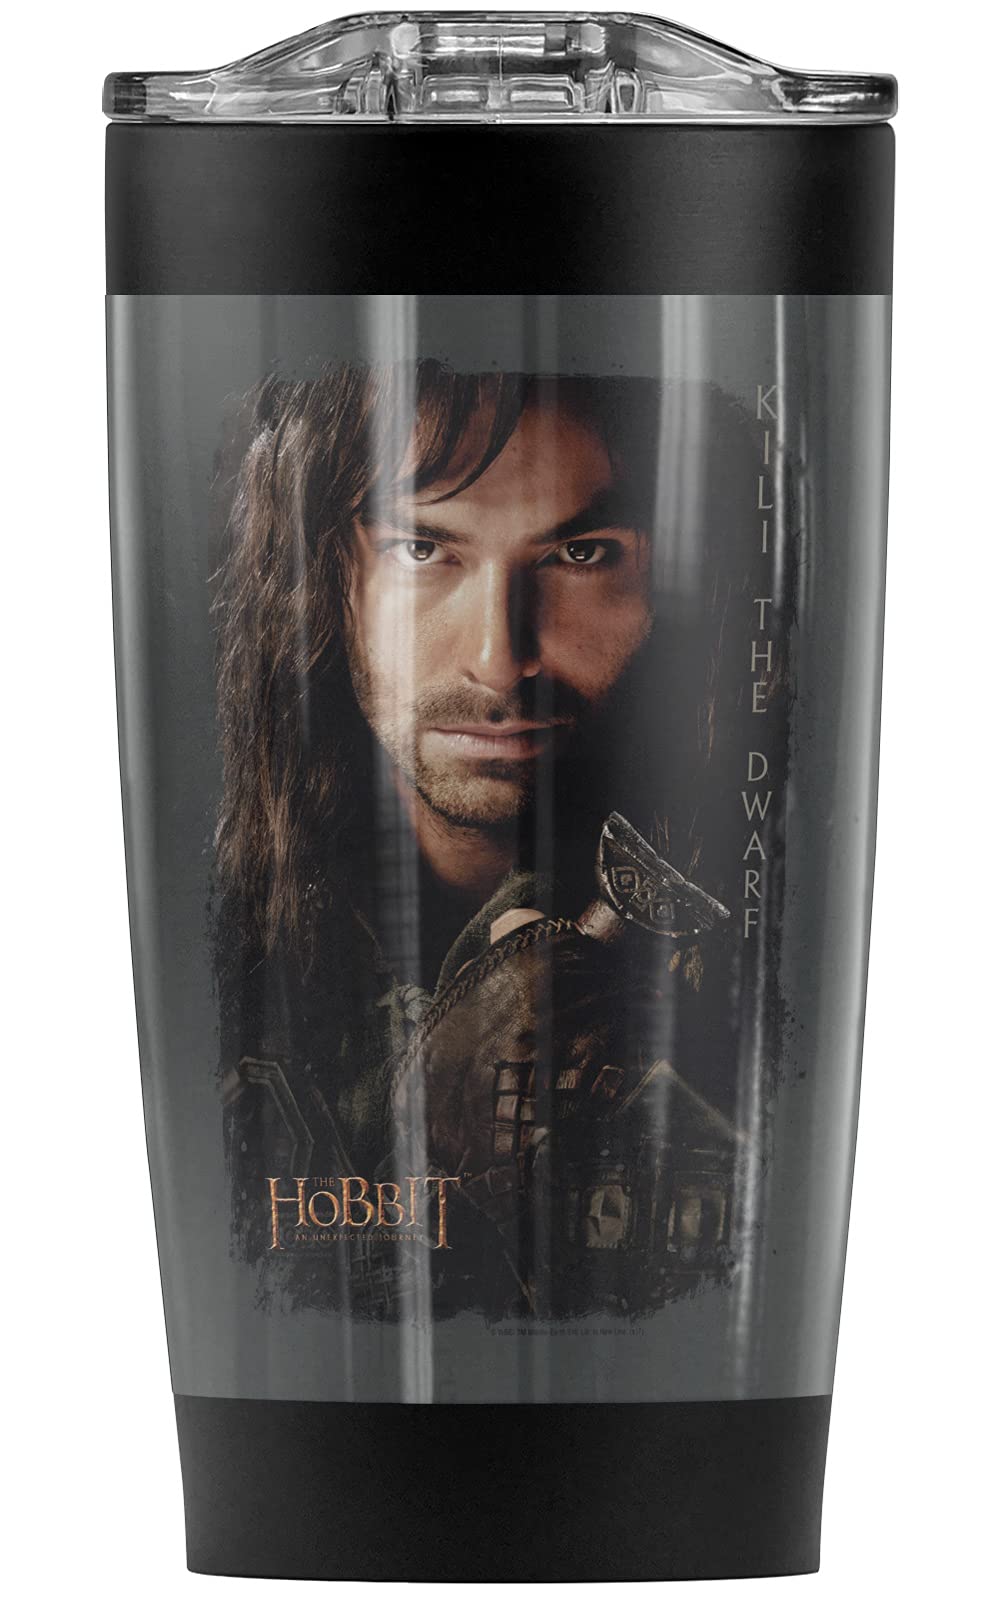 Logovision The Hobbit Kili Poster Stainless Steel Tumbler 20 oz Coffee Travel Mug/Cup, Vacuum Insulated & Double Wall with Leakproof Sliding Lid | Great for Hot Drinks and Cold Beverages